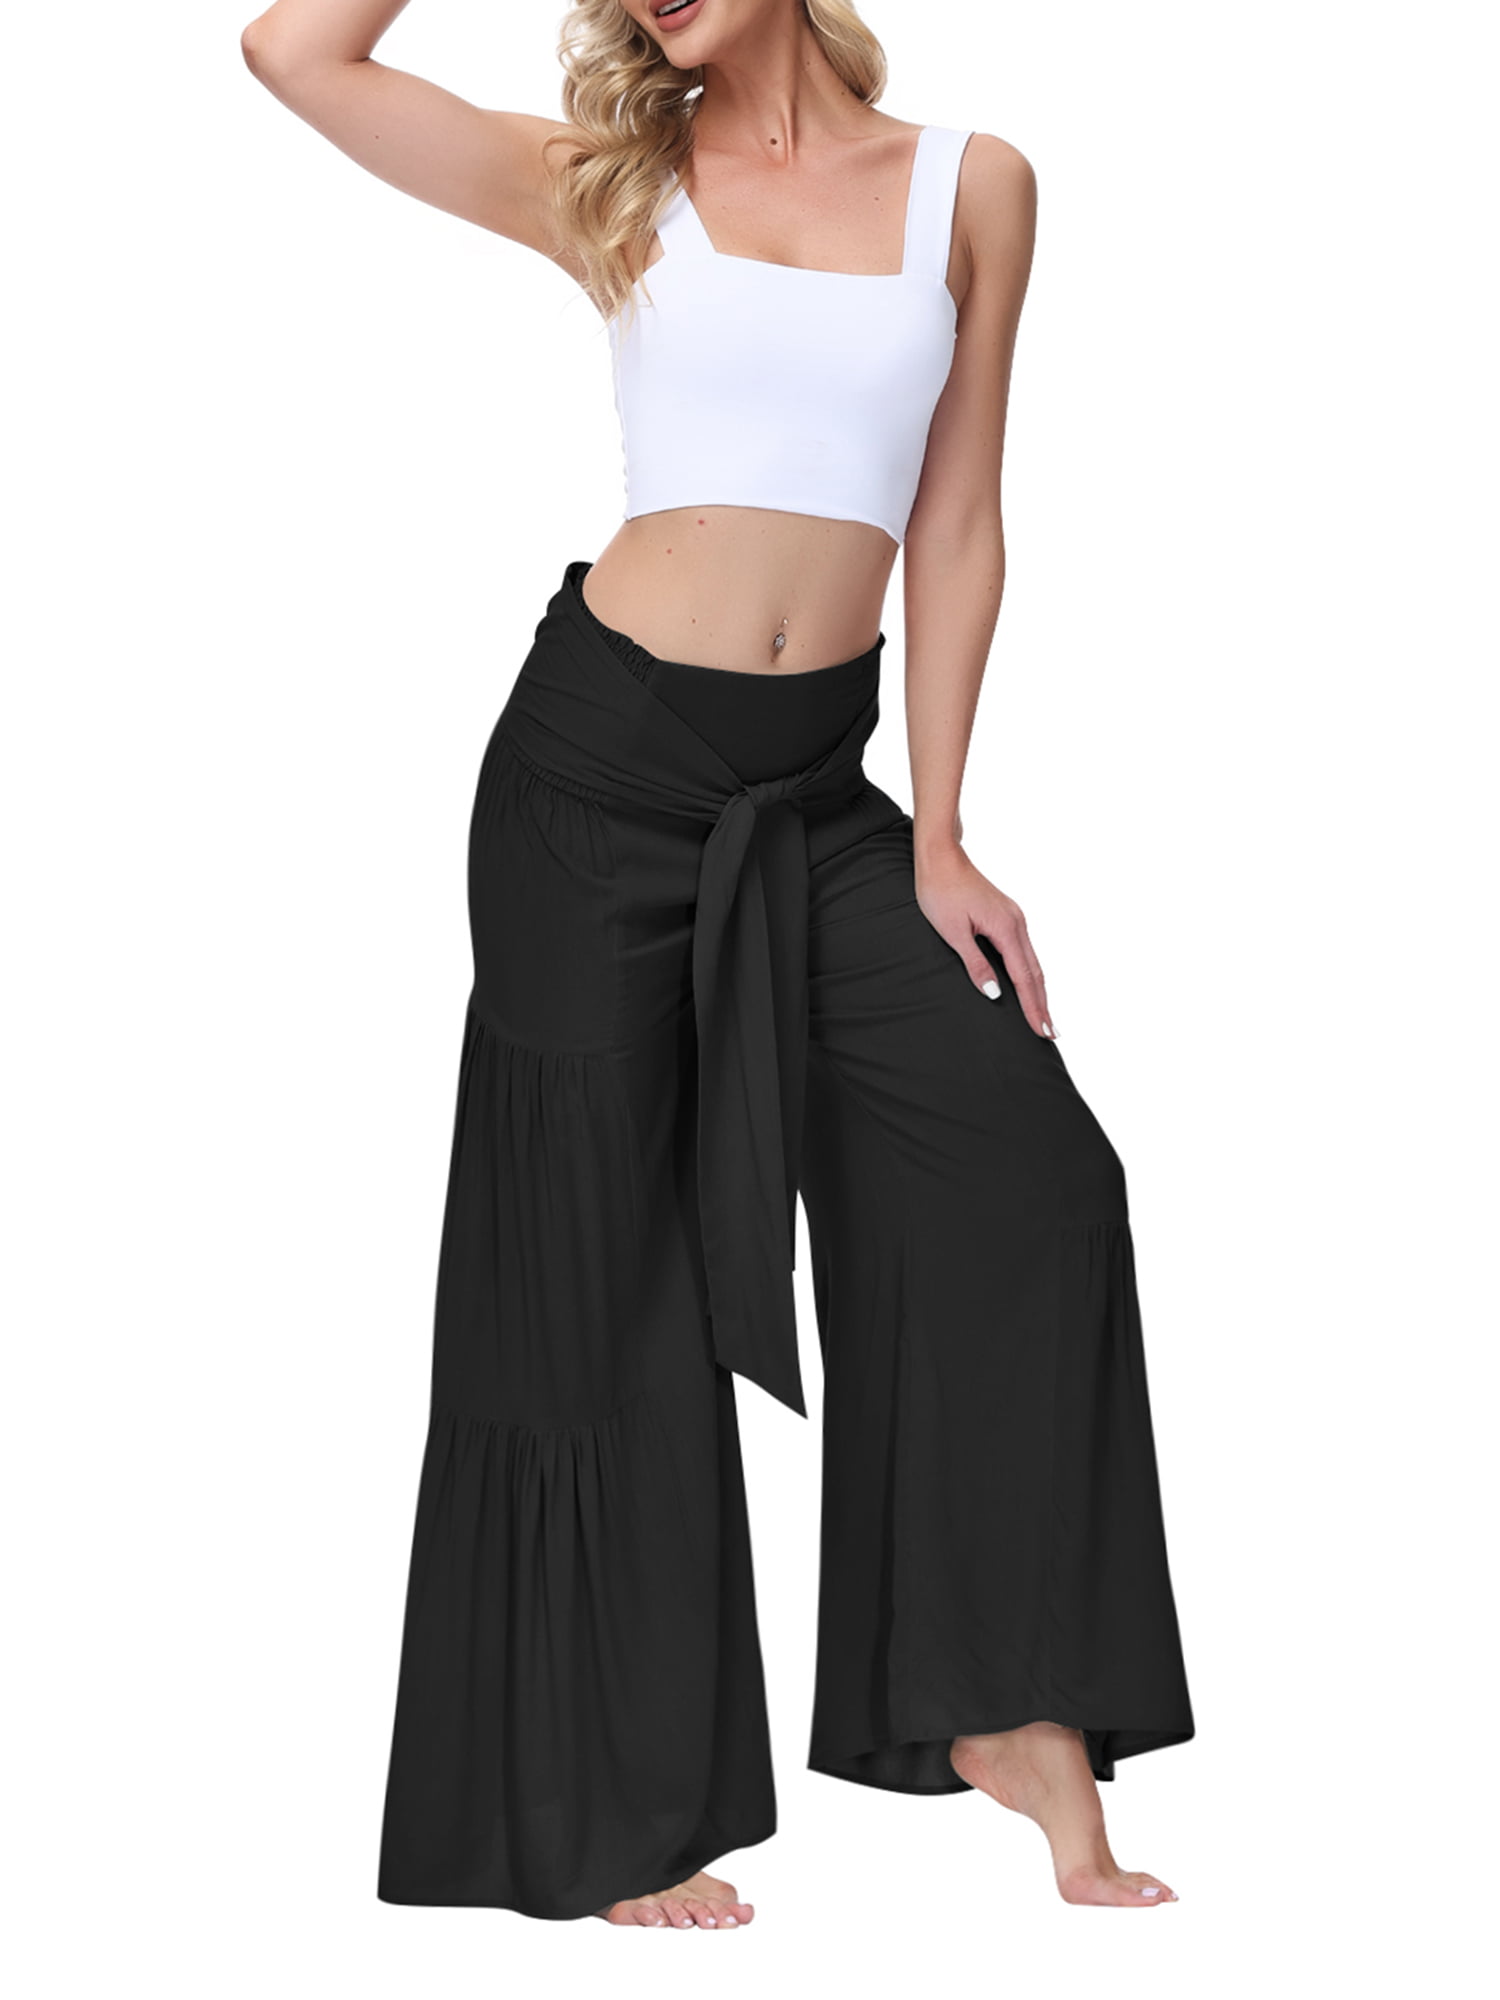 One opening Flowy Pants for Women Wide Leg Palazzo Pants Boho Casual ...